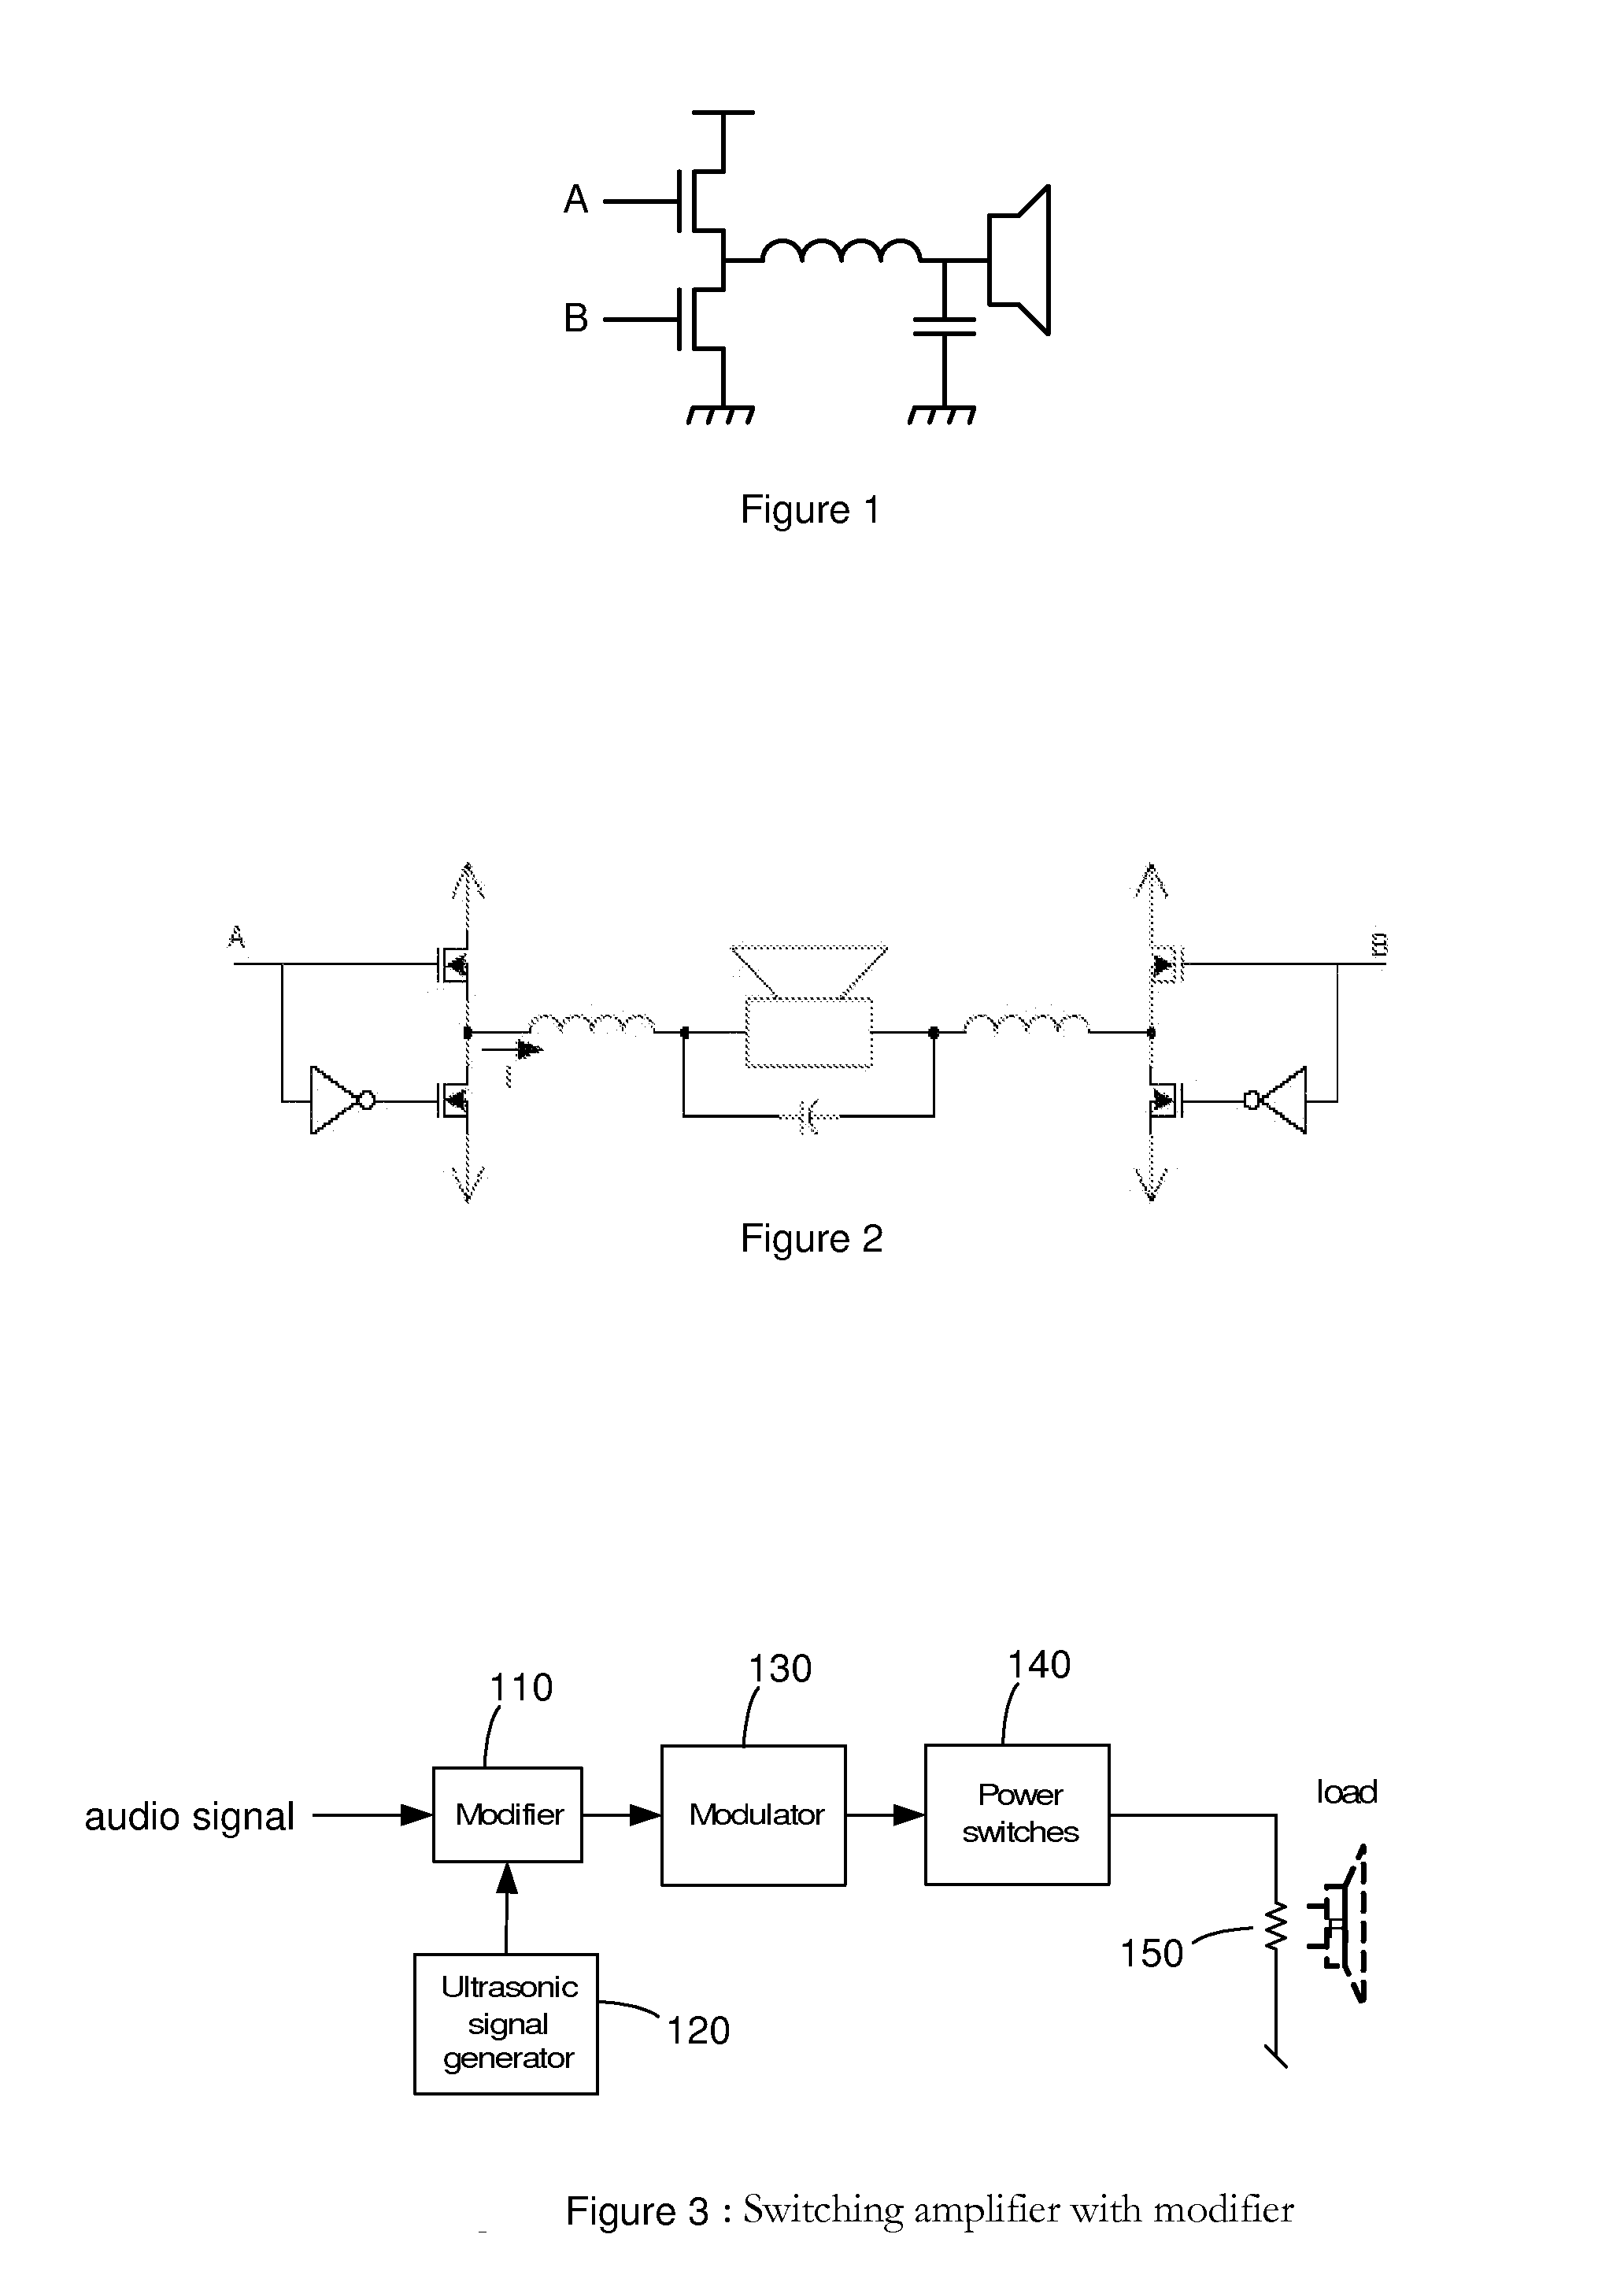 Systems and Methods for Improving Performance in a Digital Amplifier by Adding an Ultrasonic Signal to an Input Audio Signal